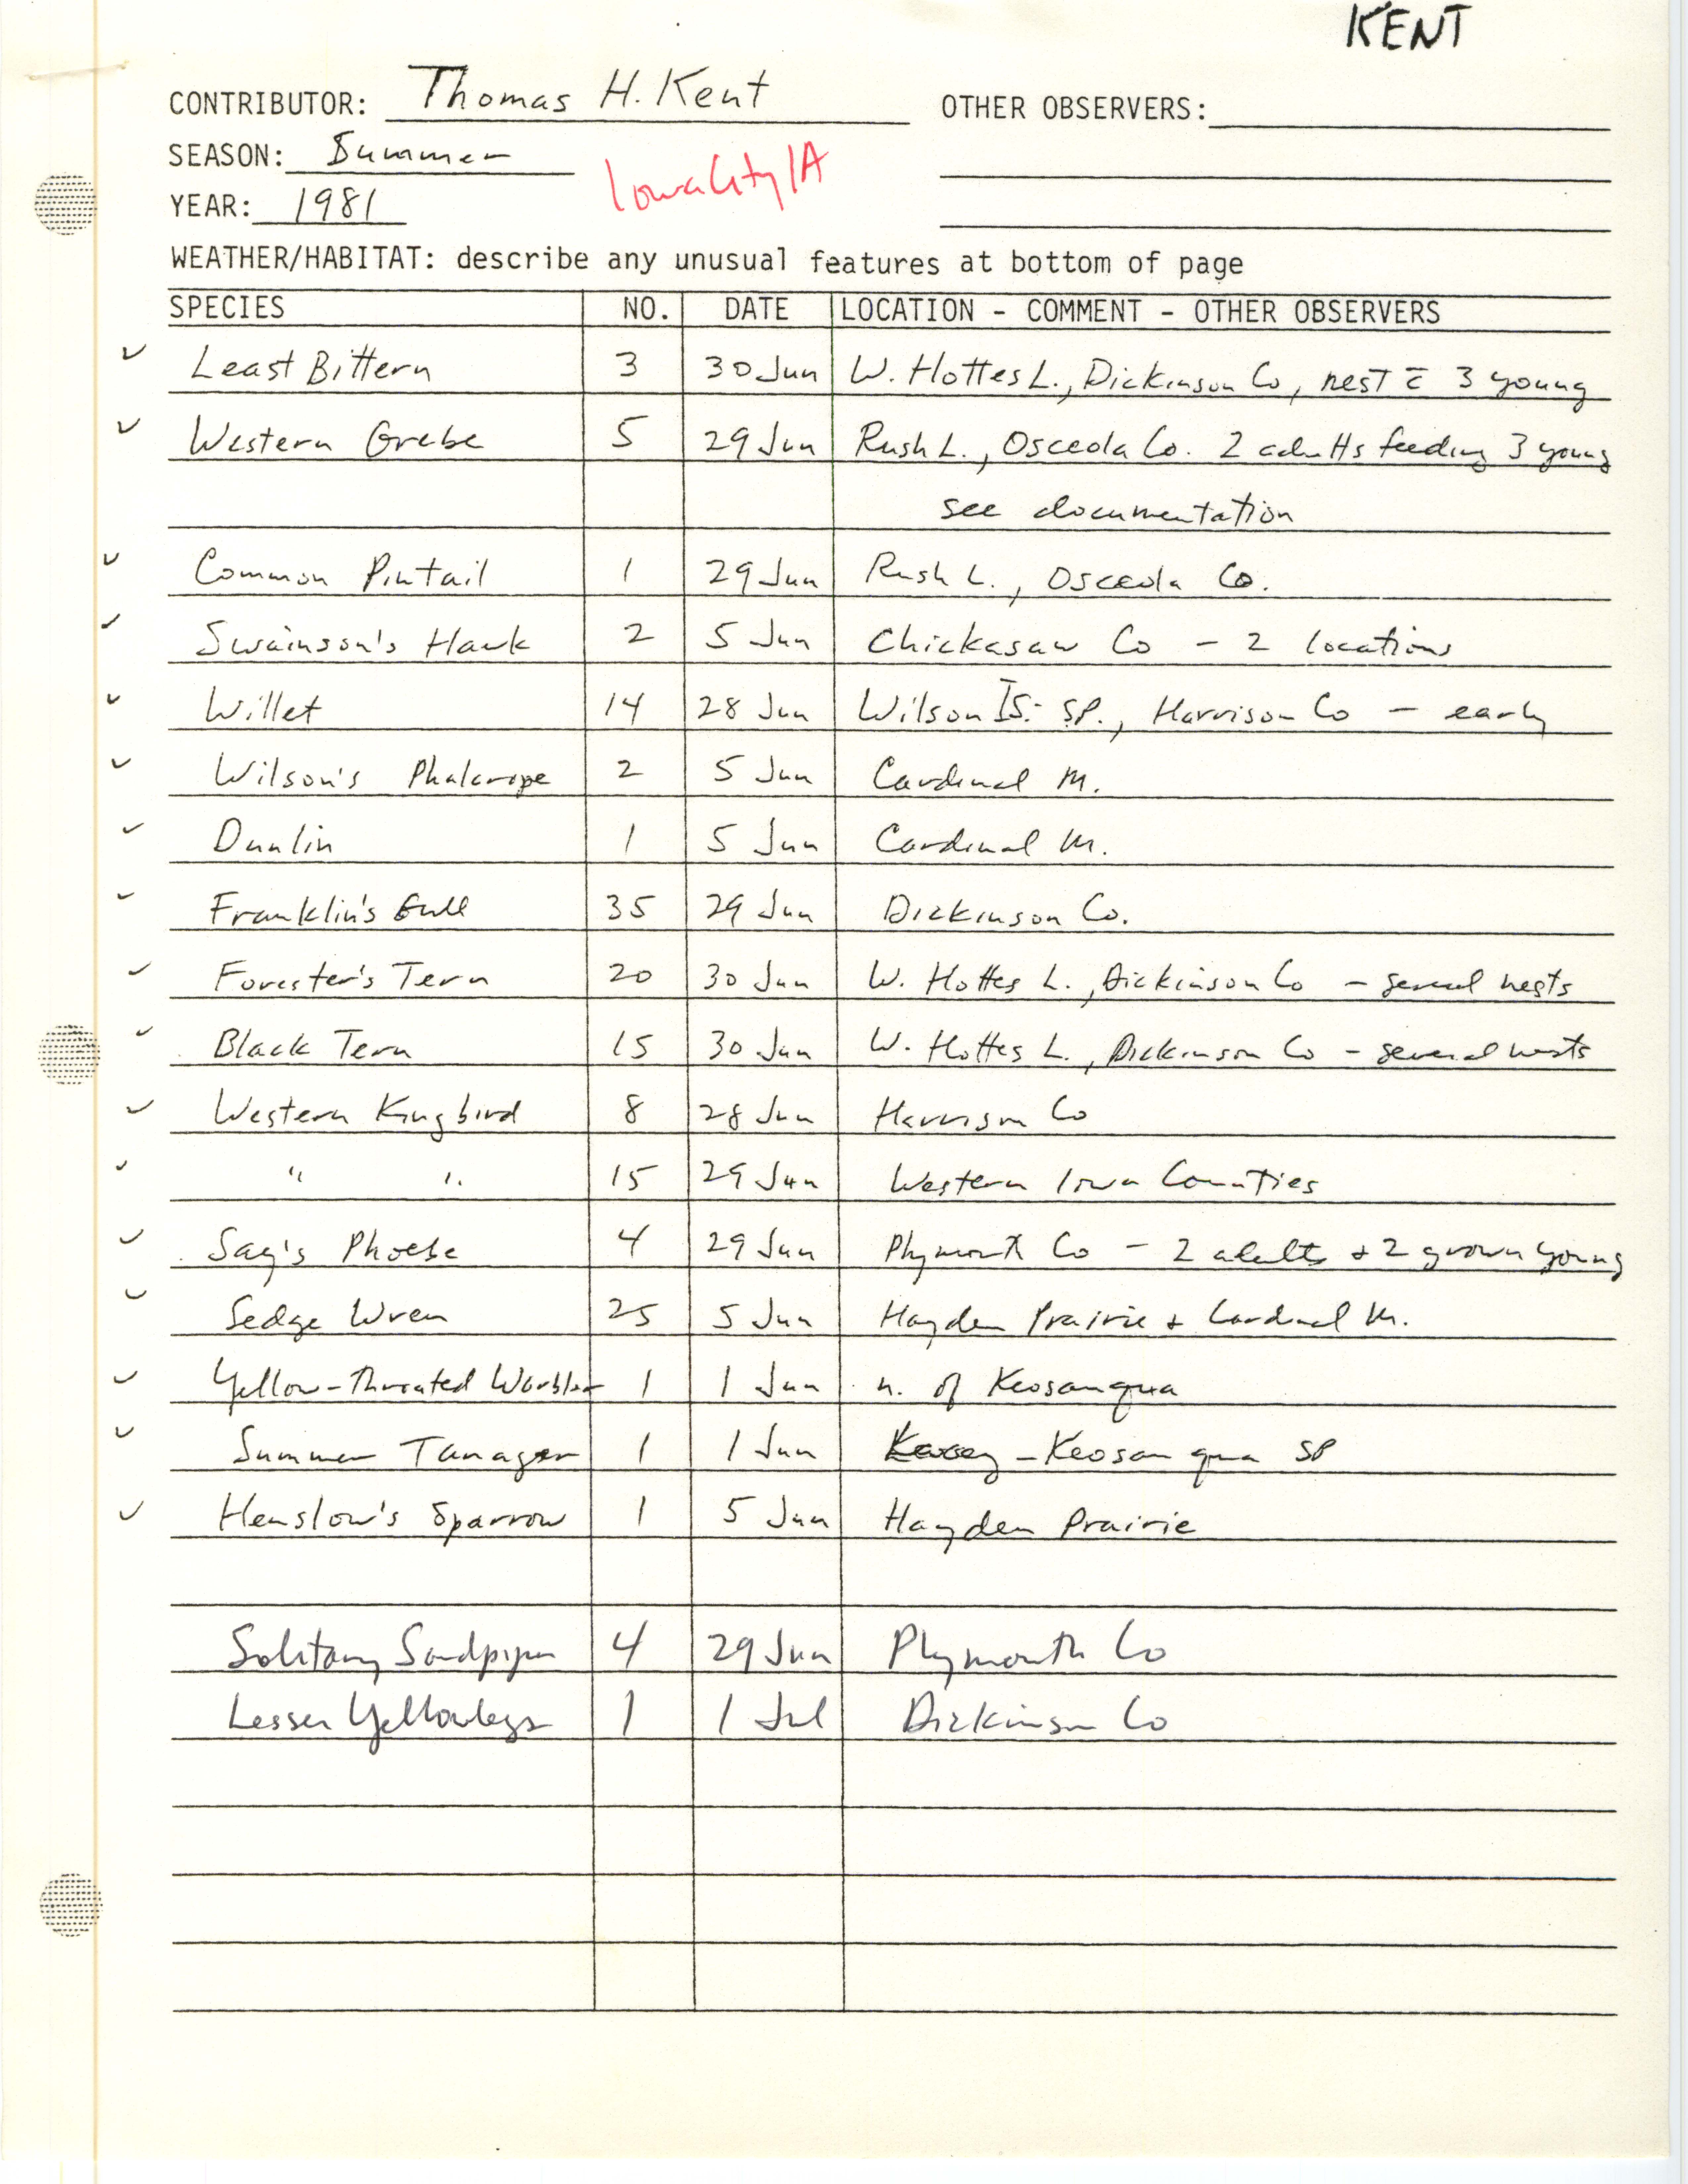 Field notes contributed by Thomas H. Kent with verifying documentation, summer 1981